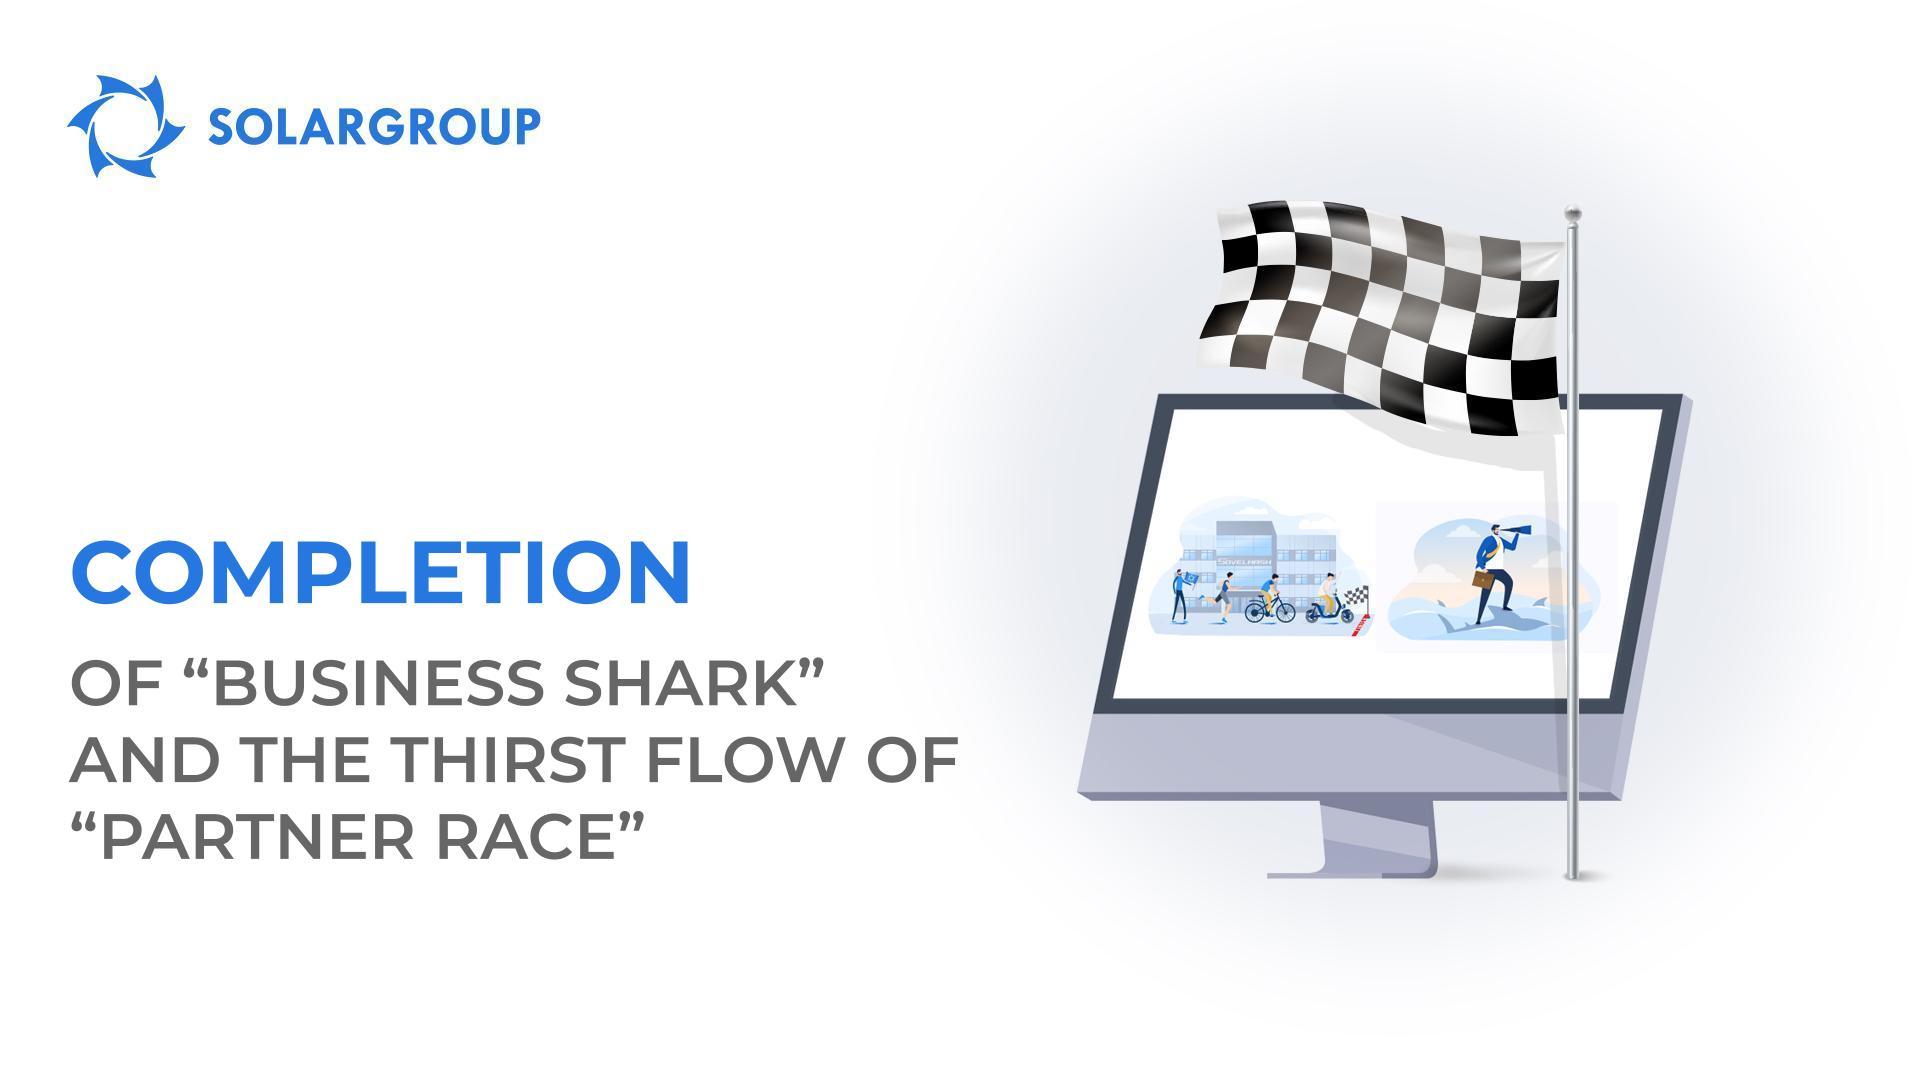 Completion of "Business Shark" and the third flow of "Partner Race"